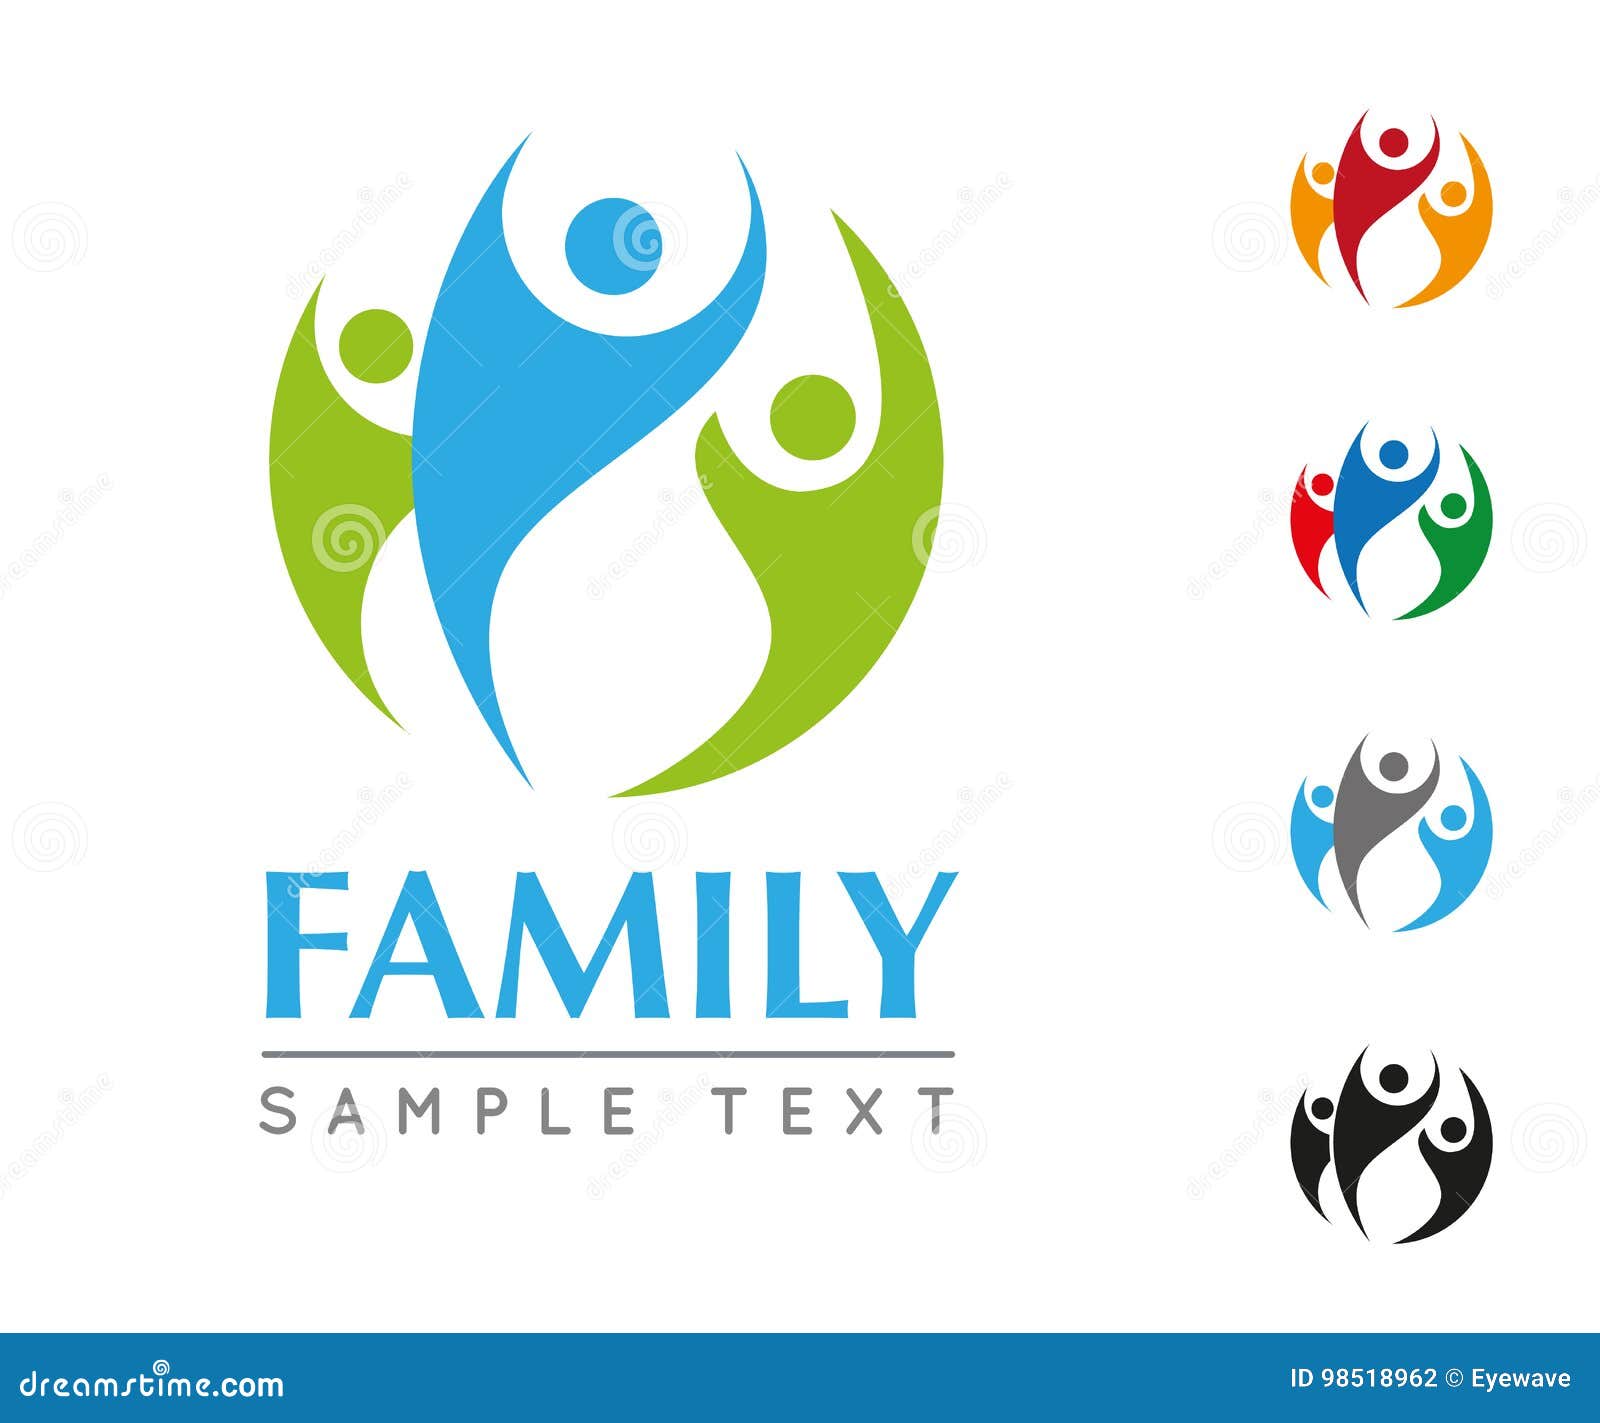 Family Company Logo Template Stock Vector - Illustration of dance, sign ...